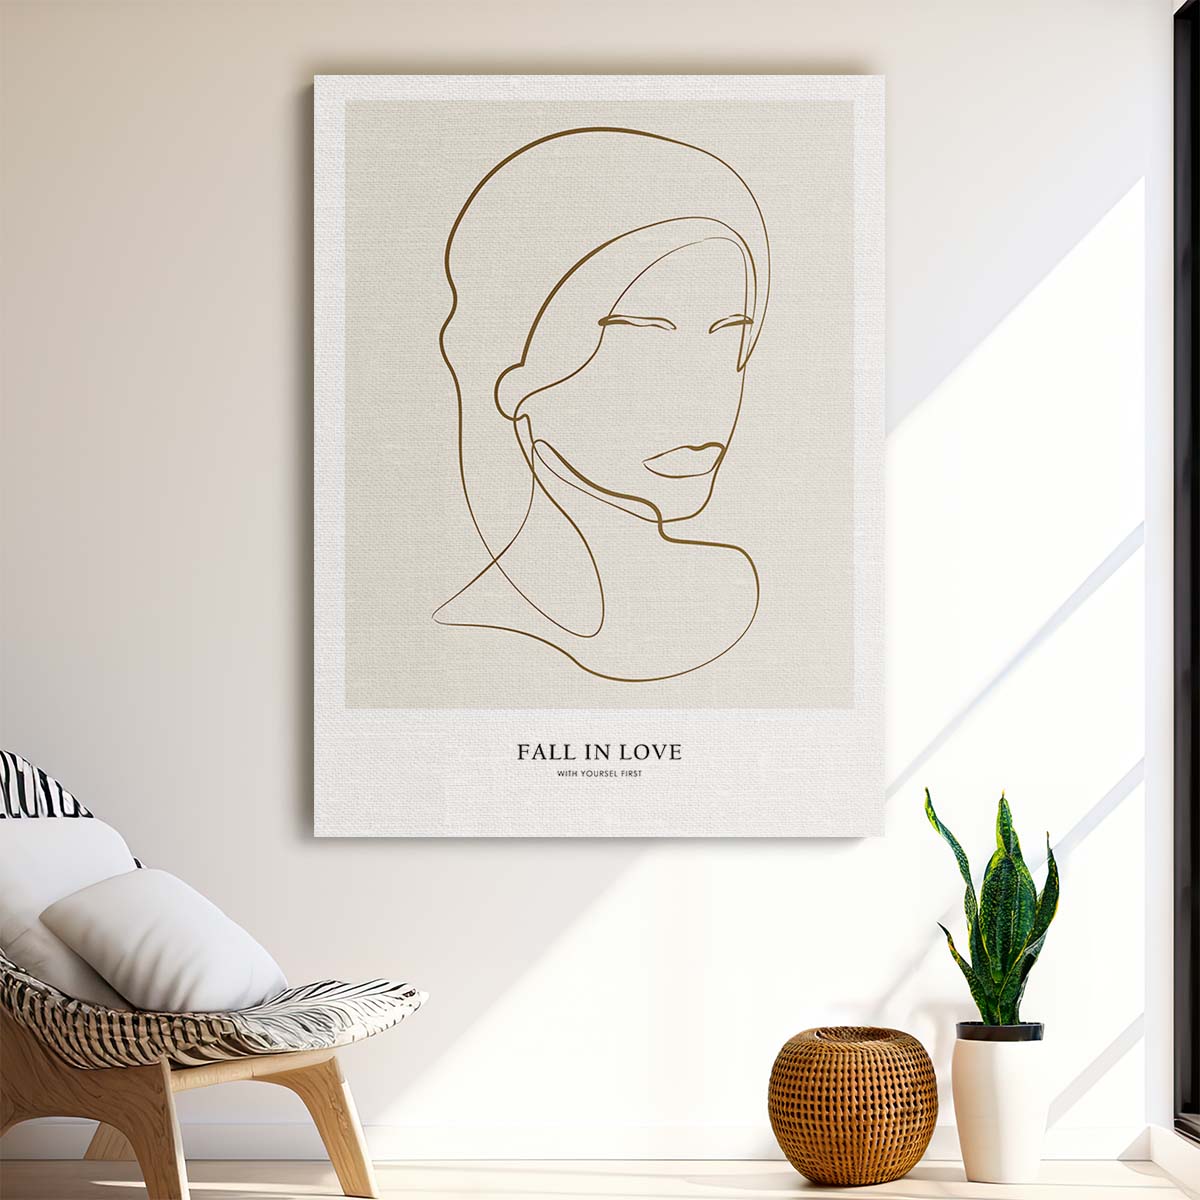 Modern Minimalist Woman Portrait Line Art Illustration with Motivational Quote by Luxuriance Designs, made in USA